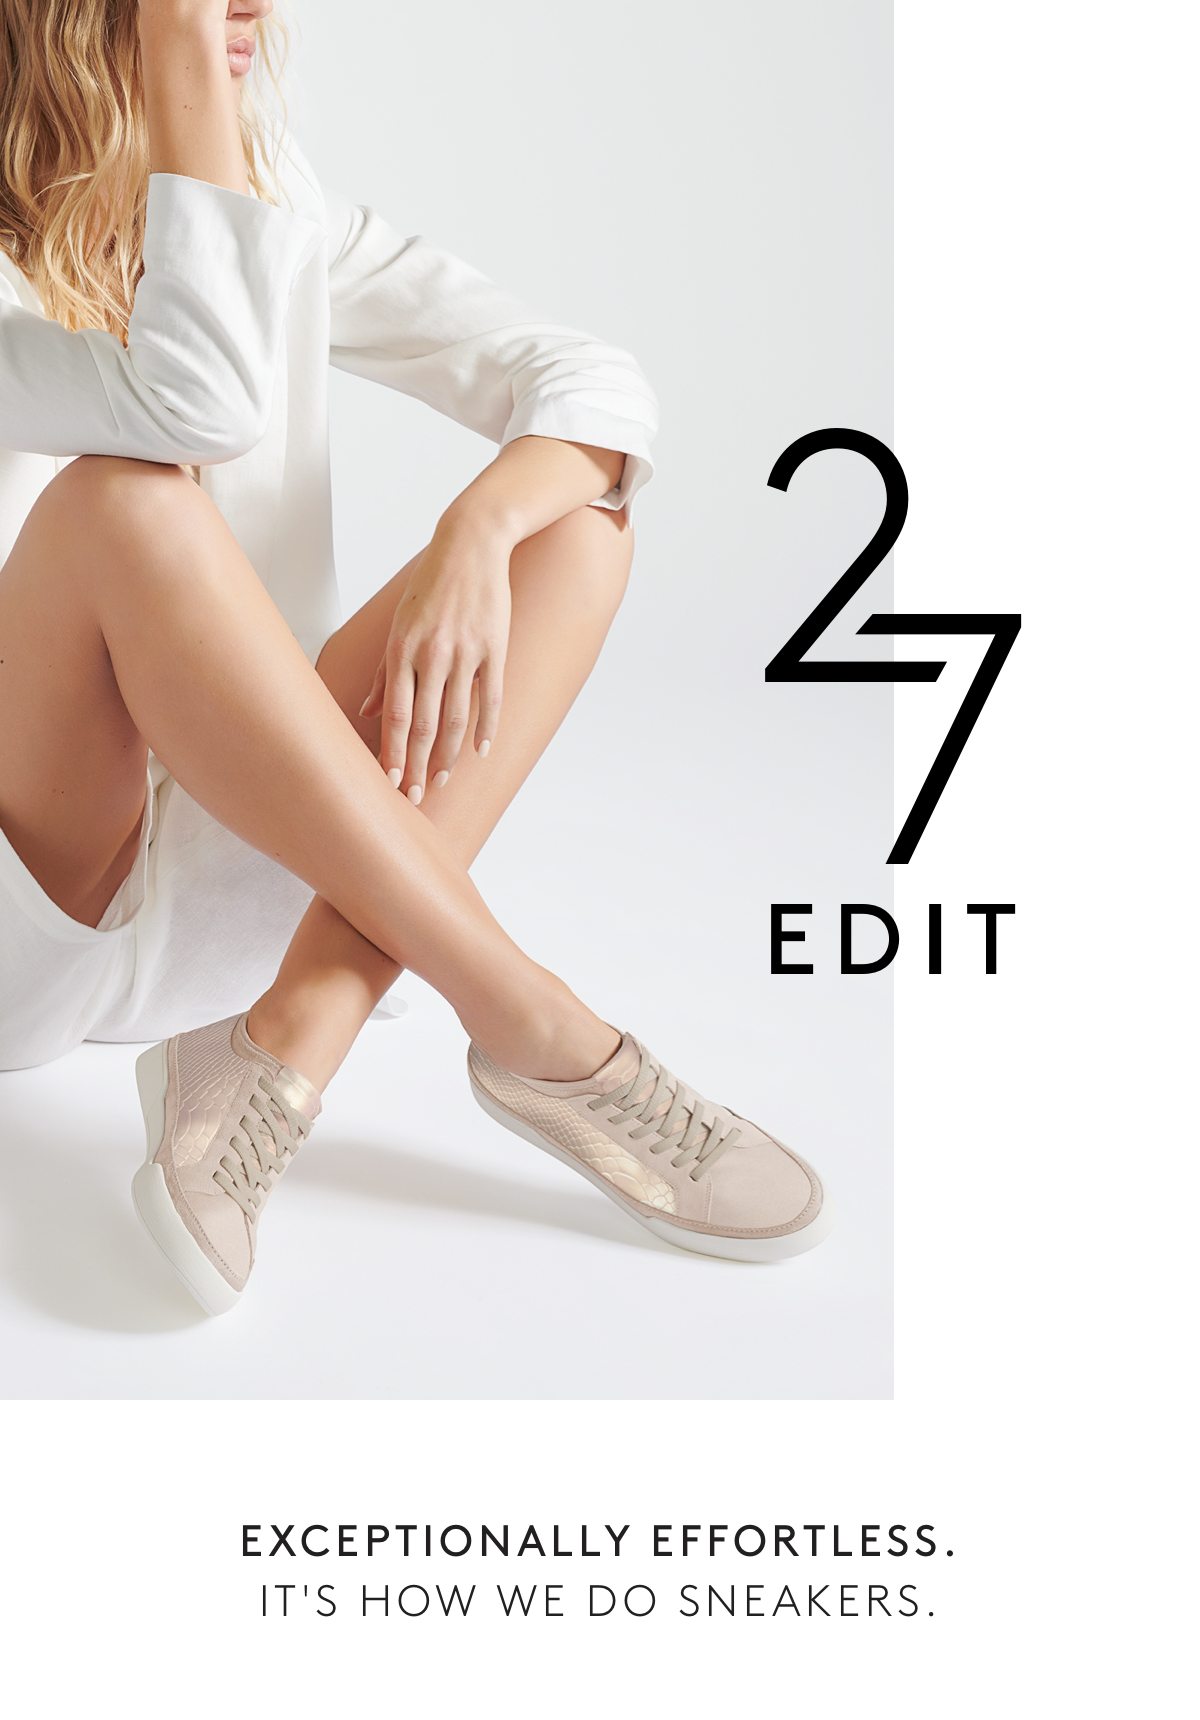 27 Edit: Exceptionally effortless. It's how we do sneakers